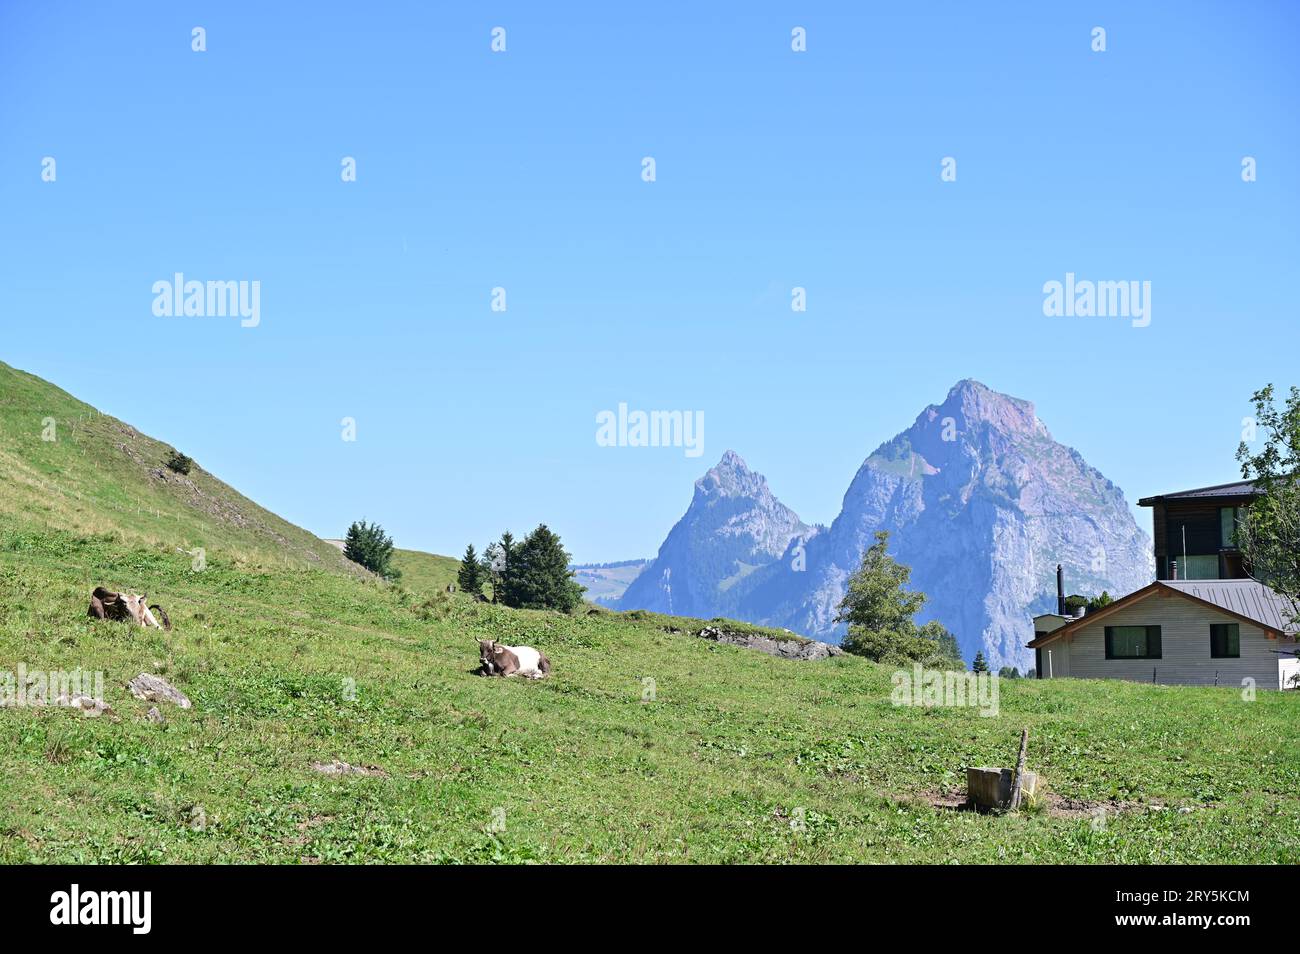 Cows sitting and resting in the field Stock Photo